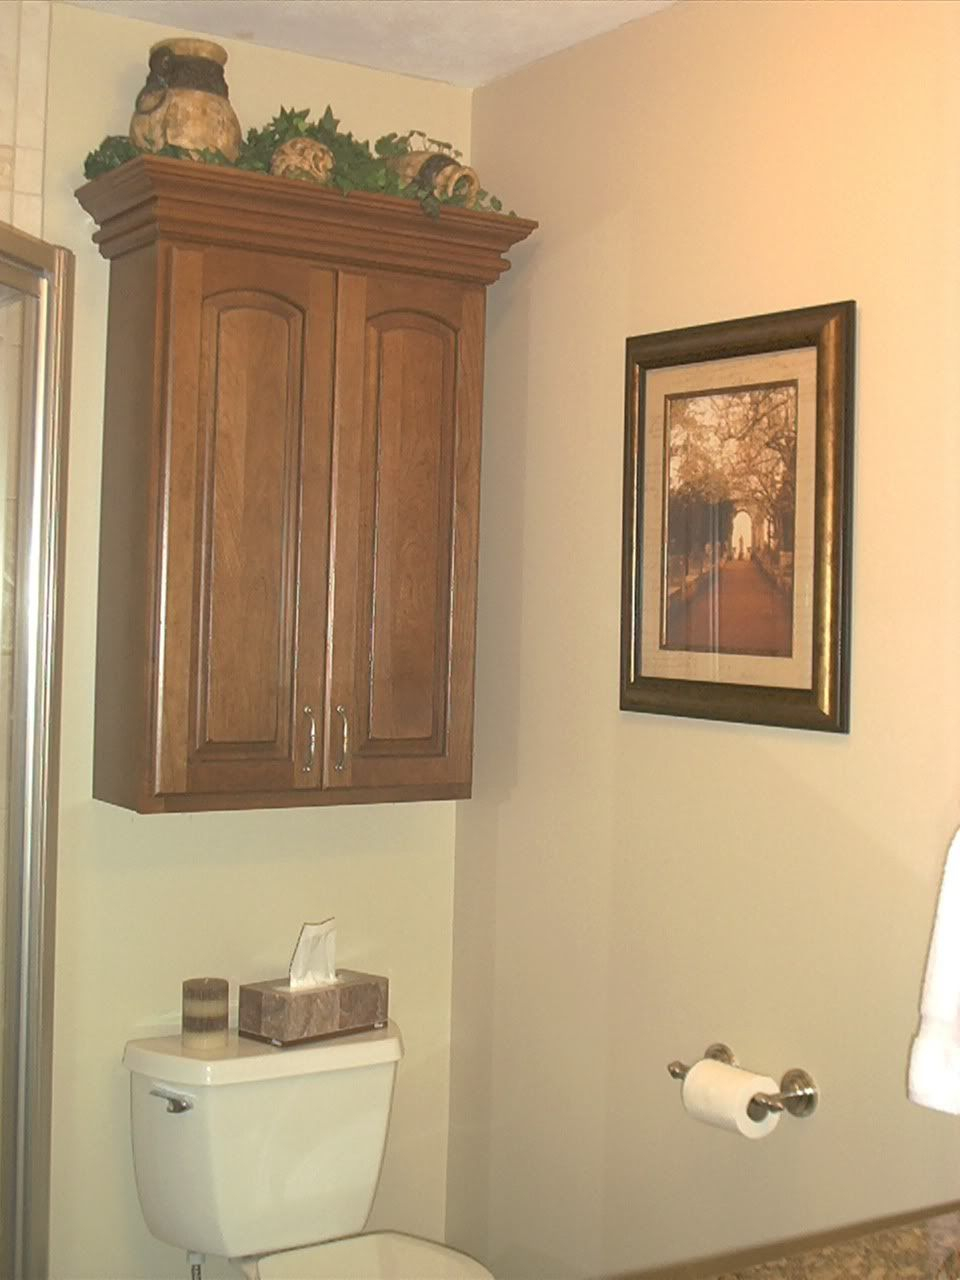 Bathroom Storage Cabinets Over Toilet Wall Cabinet Above Toilet In in measurements 960 X 1280